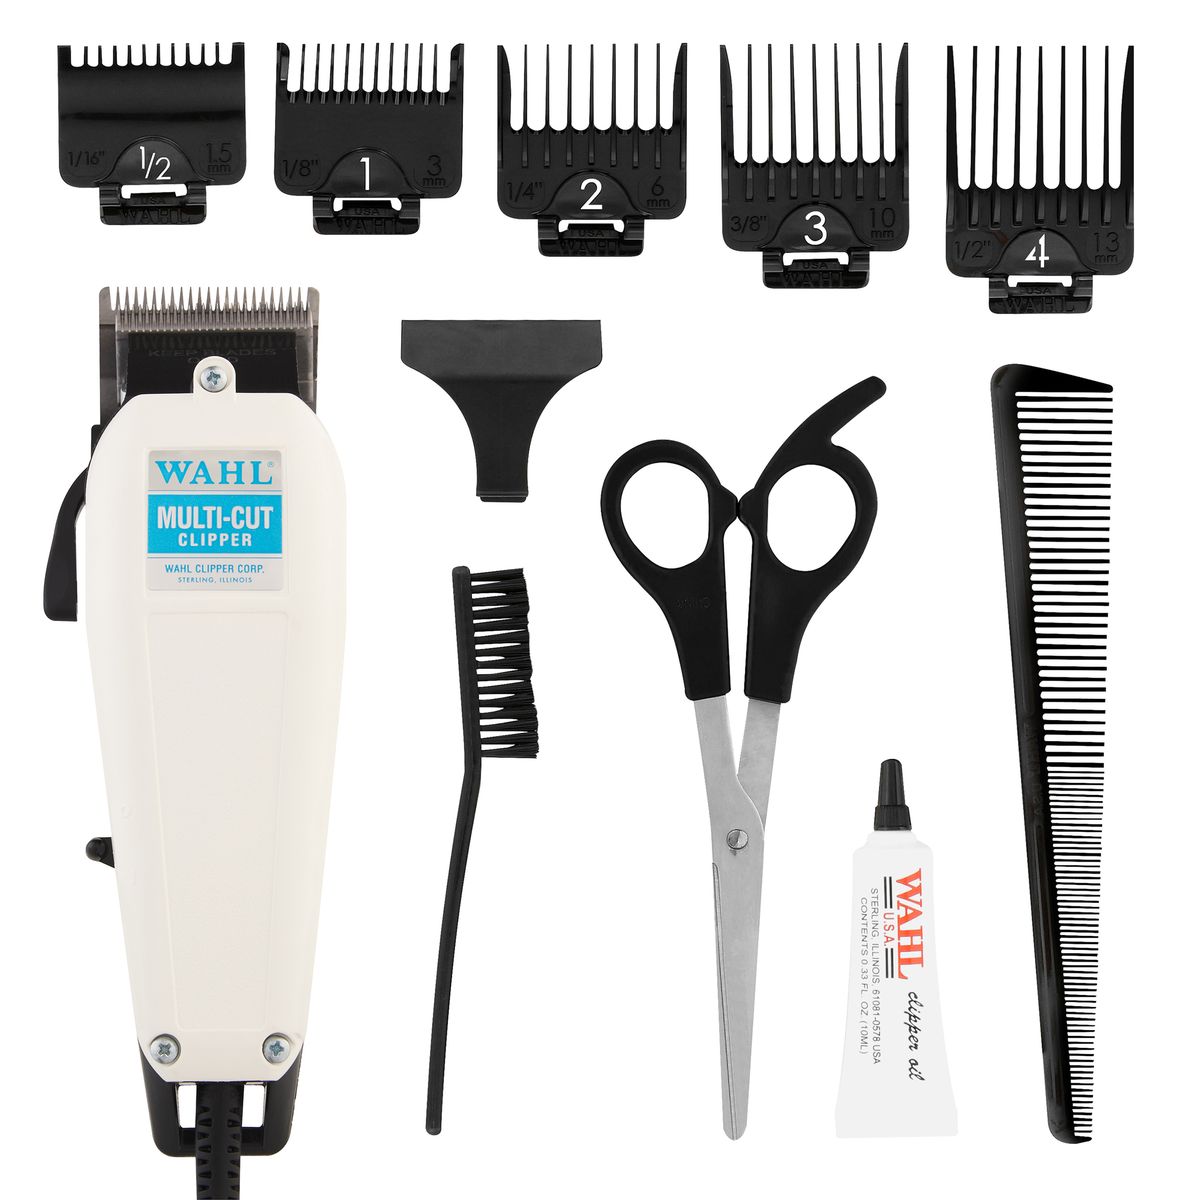 Wahl Multi-Cut Corded 11 Piece Haircutting Kit | Buy Online in South Africa  